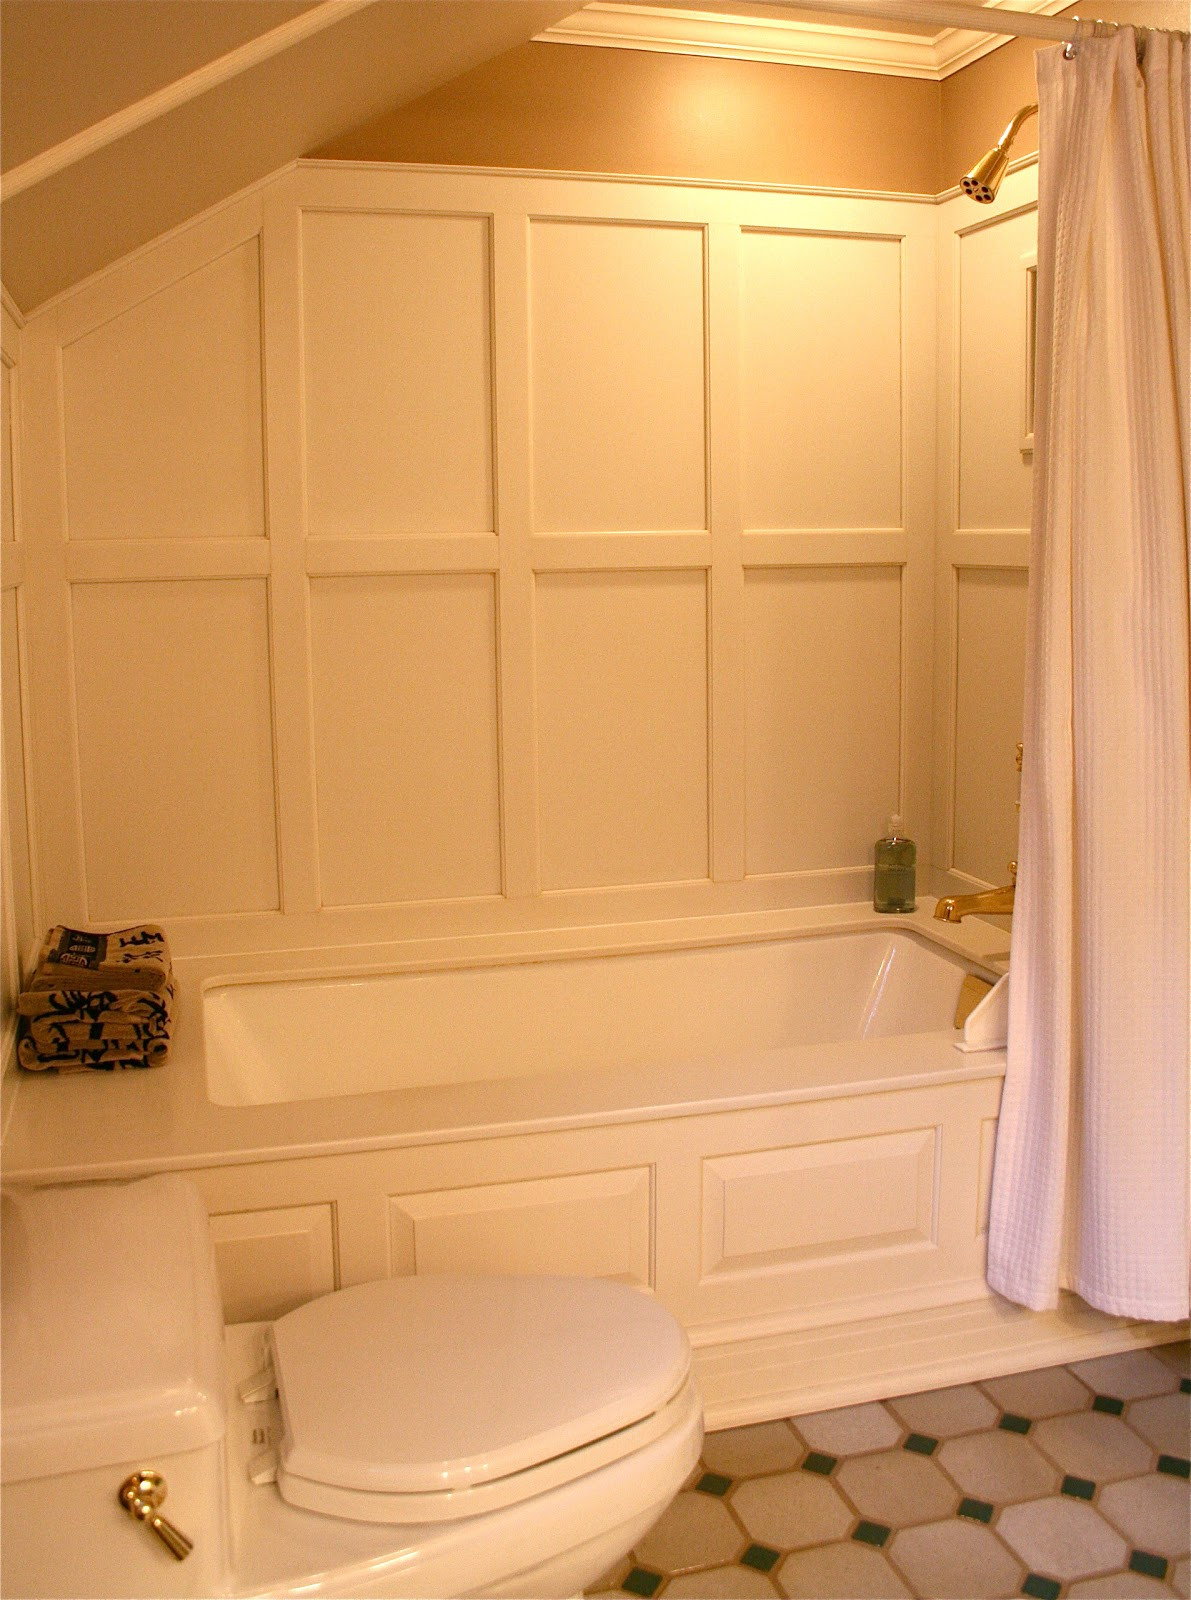 Bathroom Wall Covering Options
 Antiqueaholics BATHTUB SURROUND PANELED WITH CORIAN